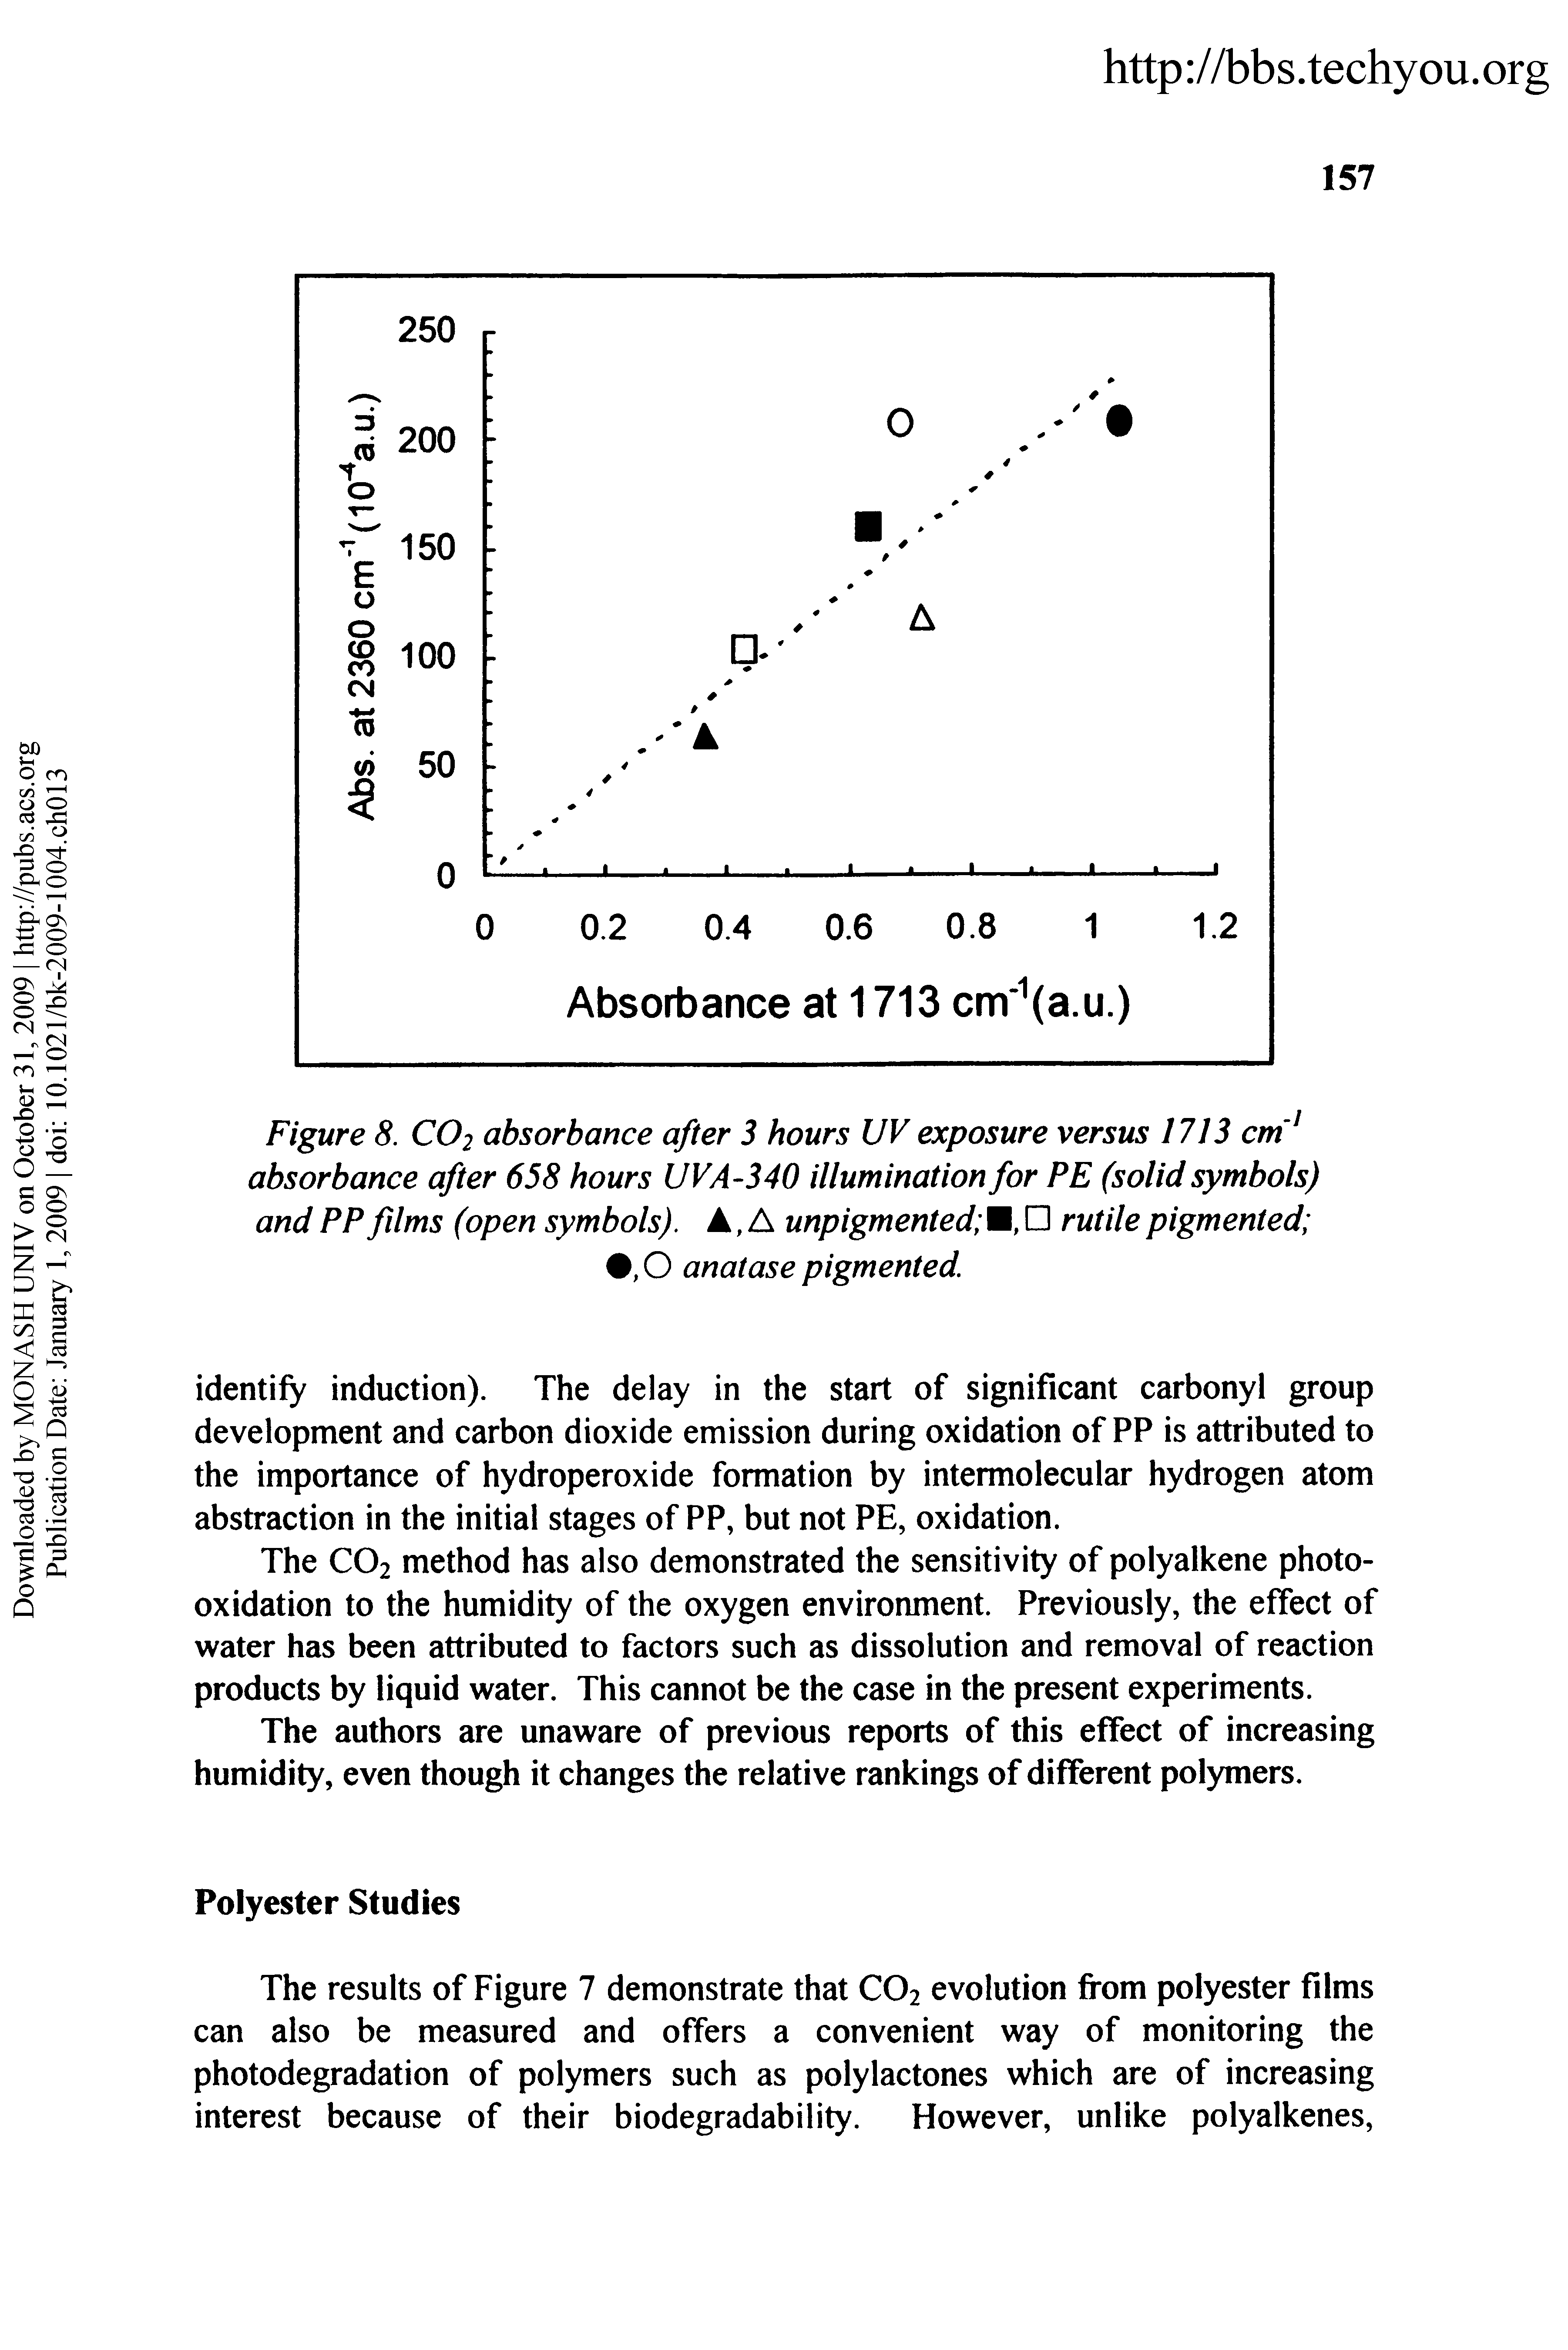 Figure 8. CO2 absorbance after 3 hours UV exposure versus 1713 cm absorbance after 658 hours UVA-340 illumination for PE (solid symbols) and PP films (open symbols). A, A unpigmented M, rutile pigmented , O anatase pigmented.